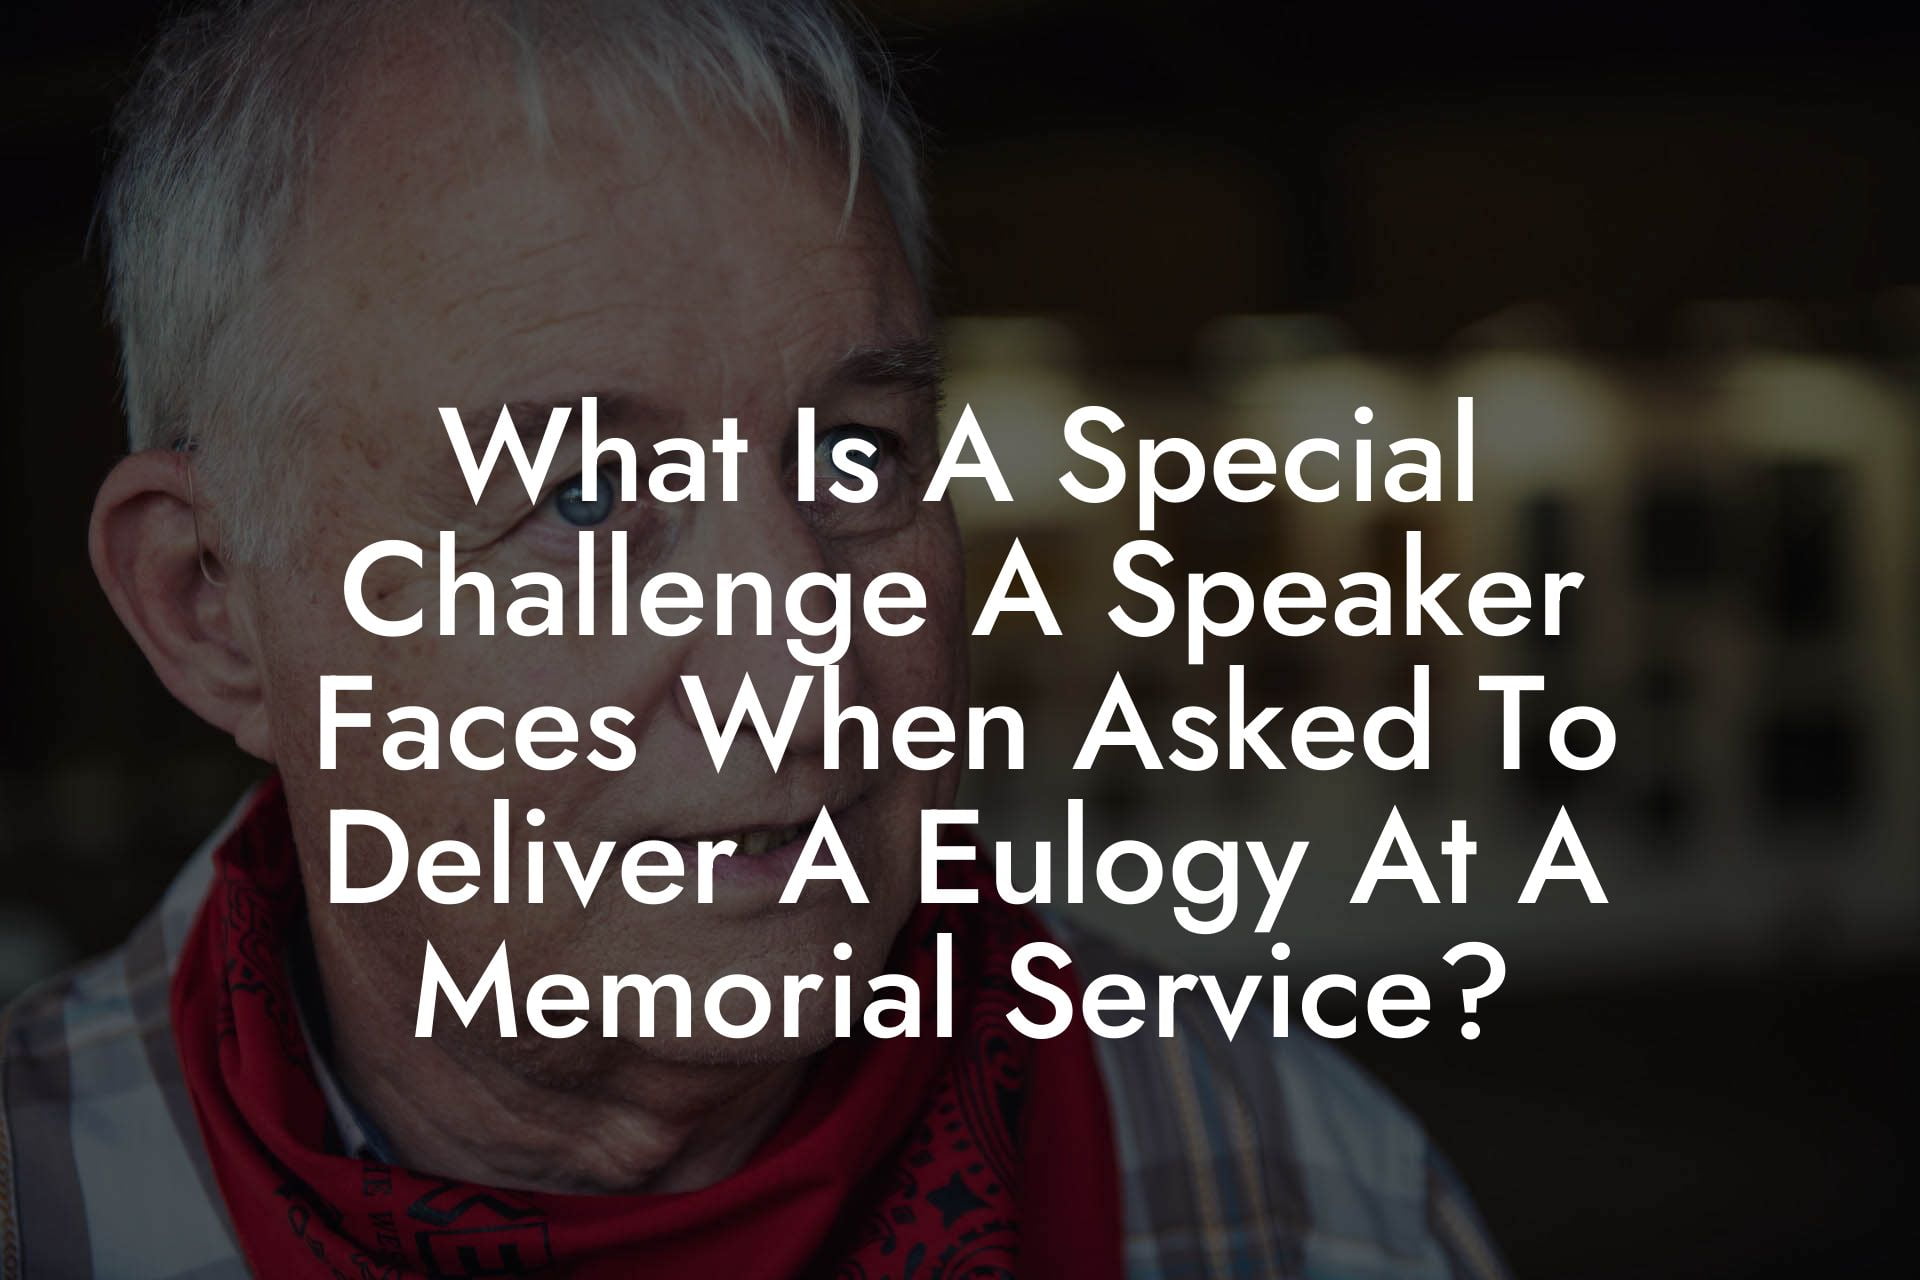 What Is A Special Challenge A Speaker Faces When Asked To Deliver A Eulogy At A Memorial Service